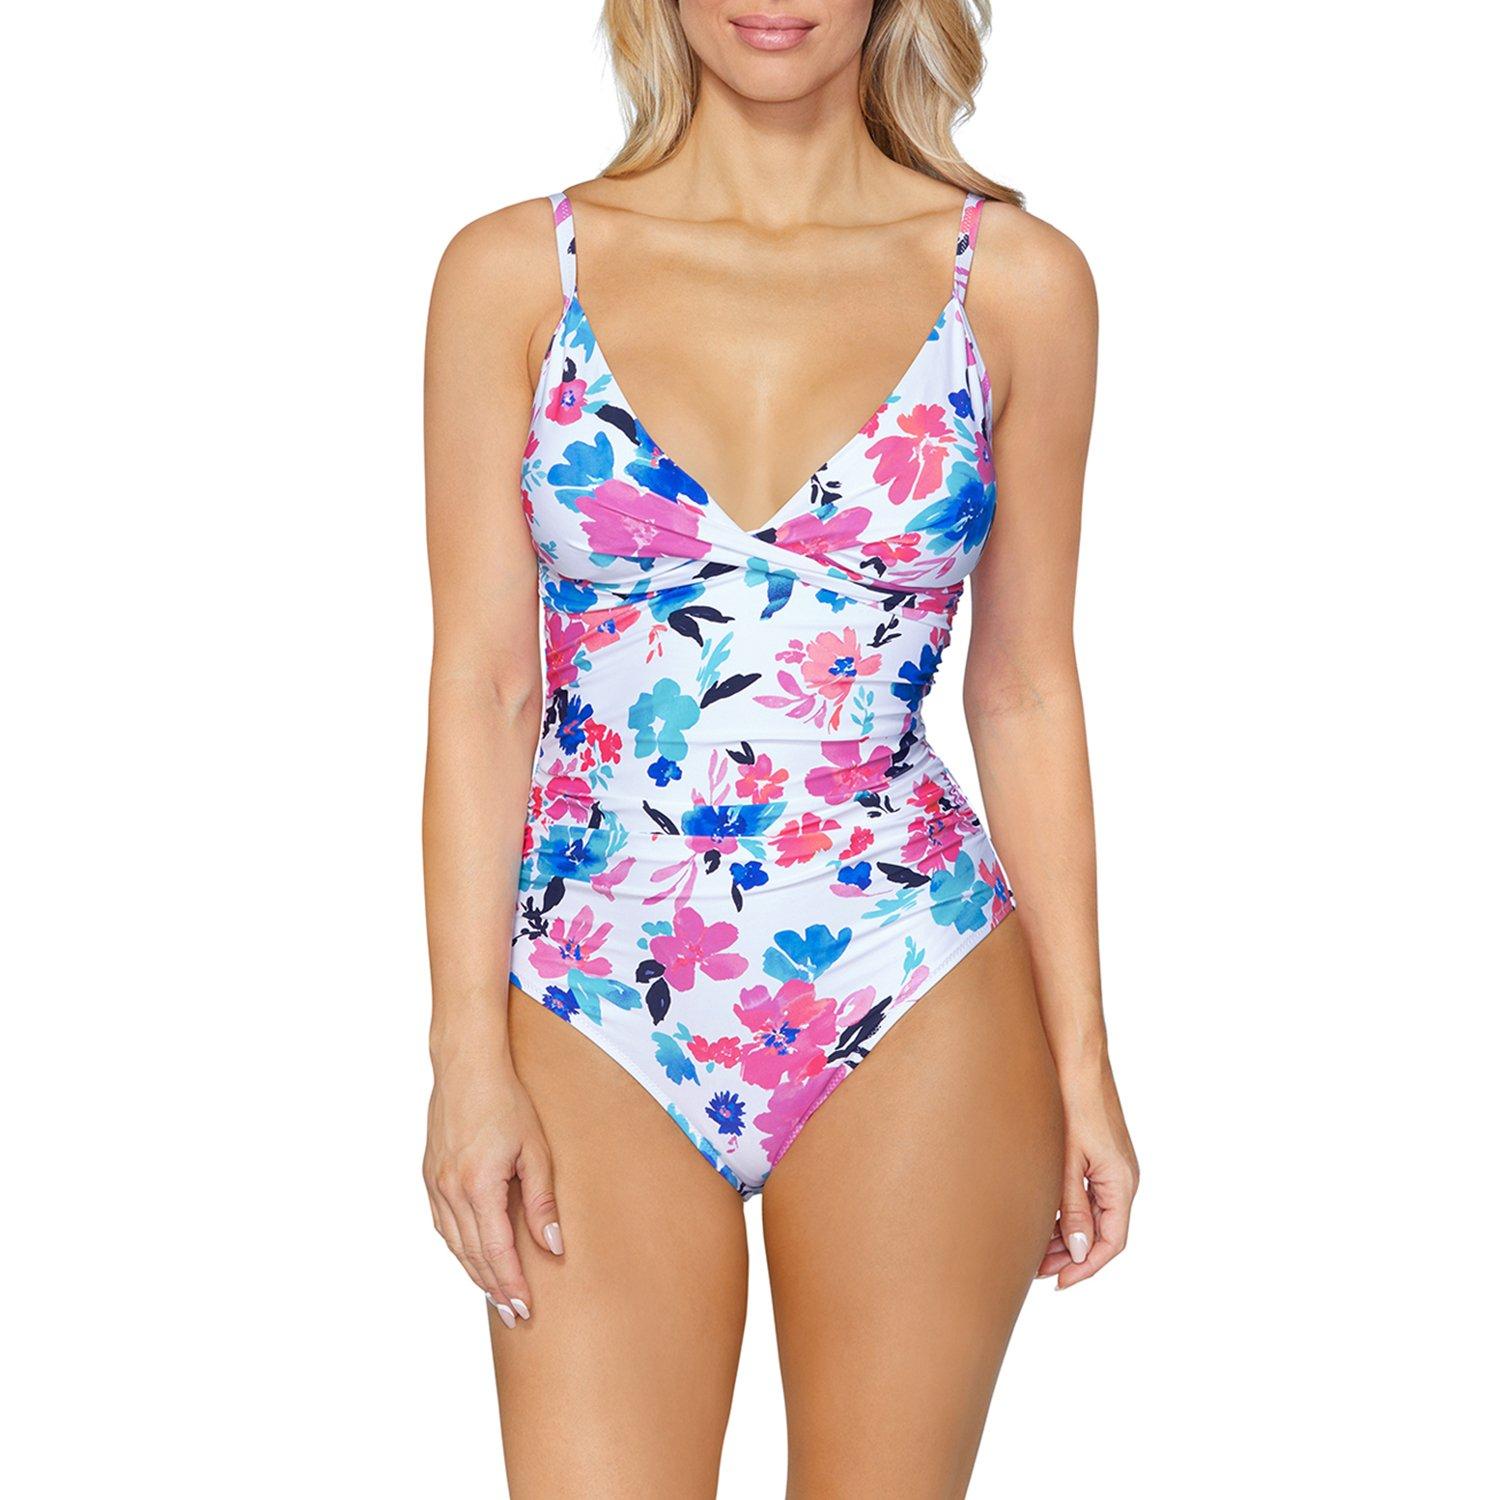 Leilani one piece Swimsuit Sz 6 women's floral Turquoise Brown